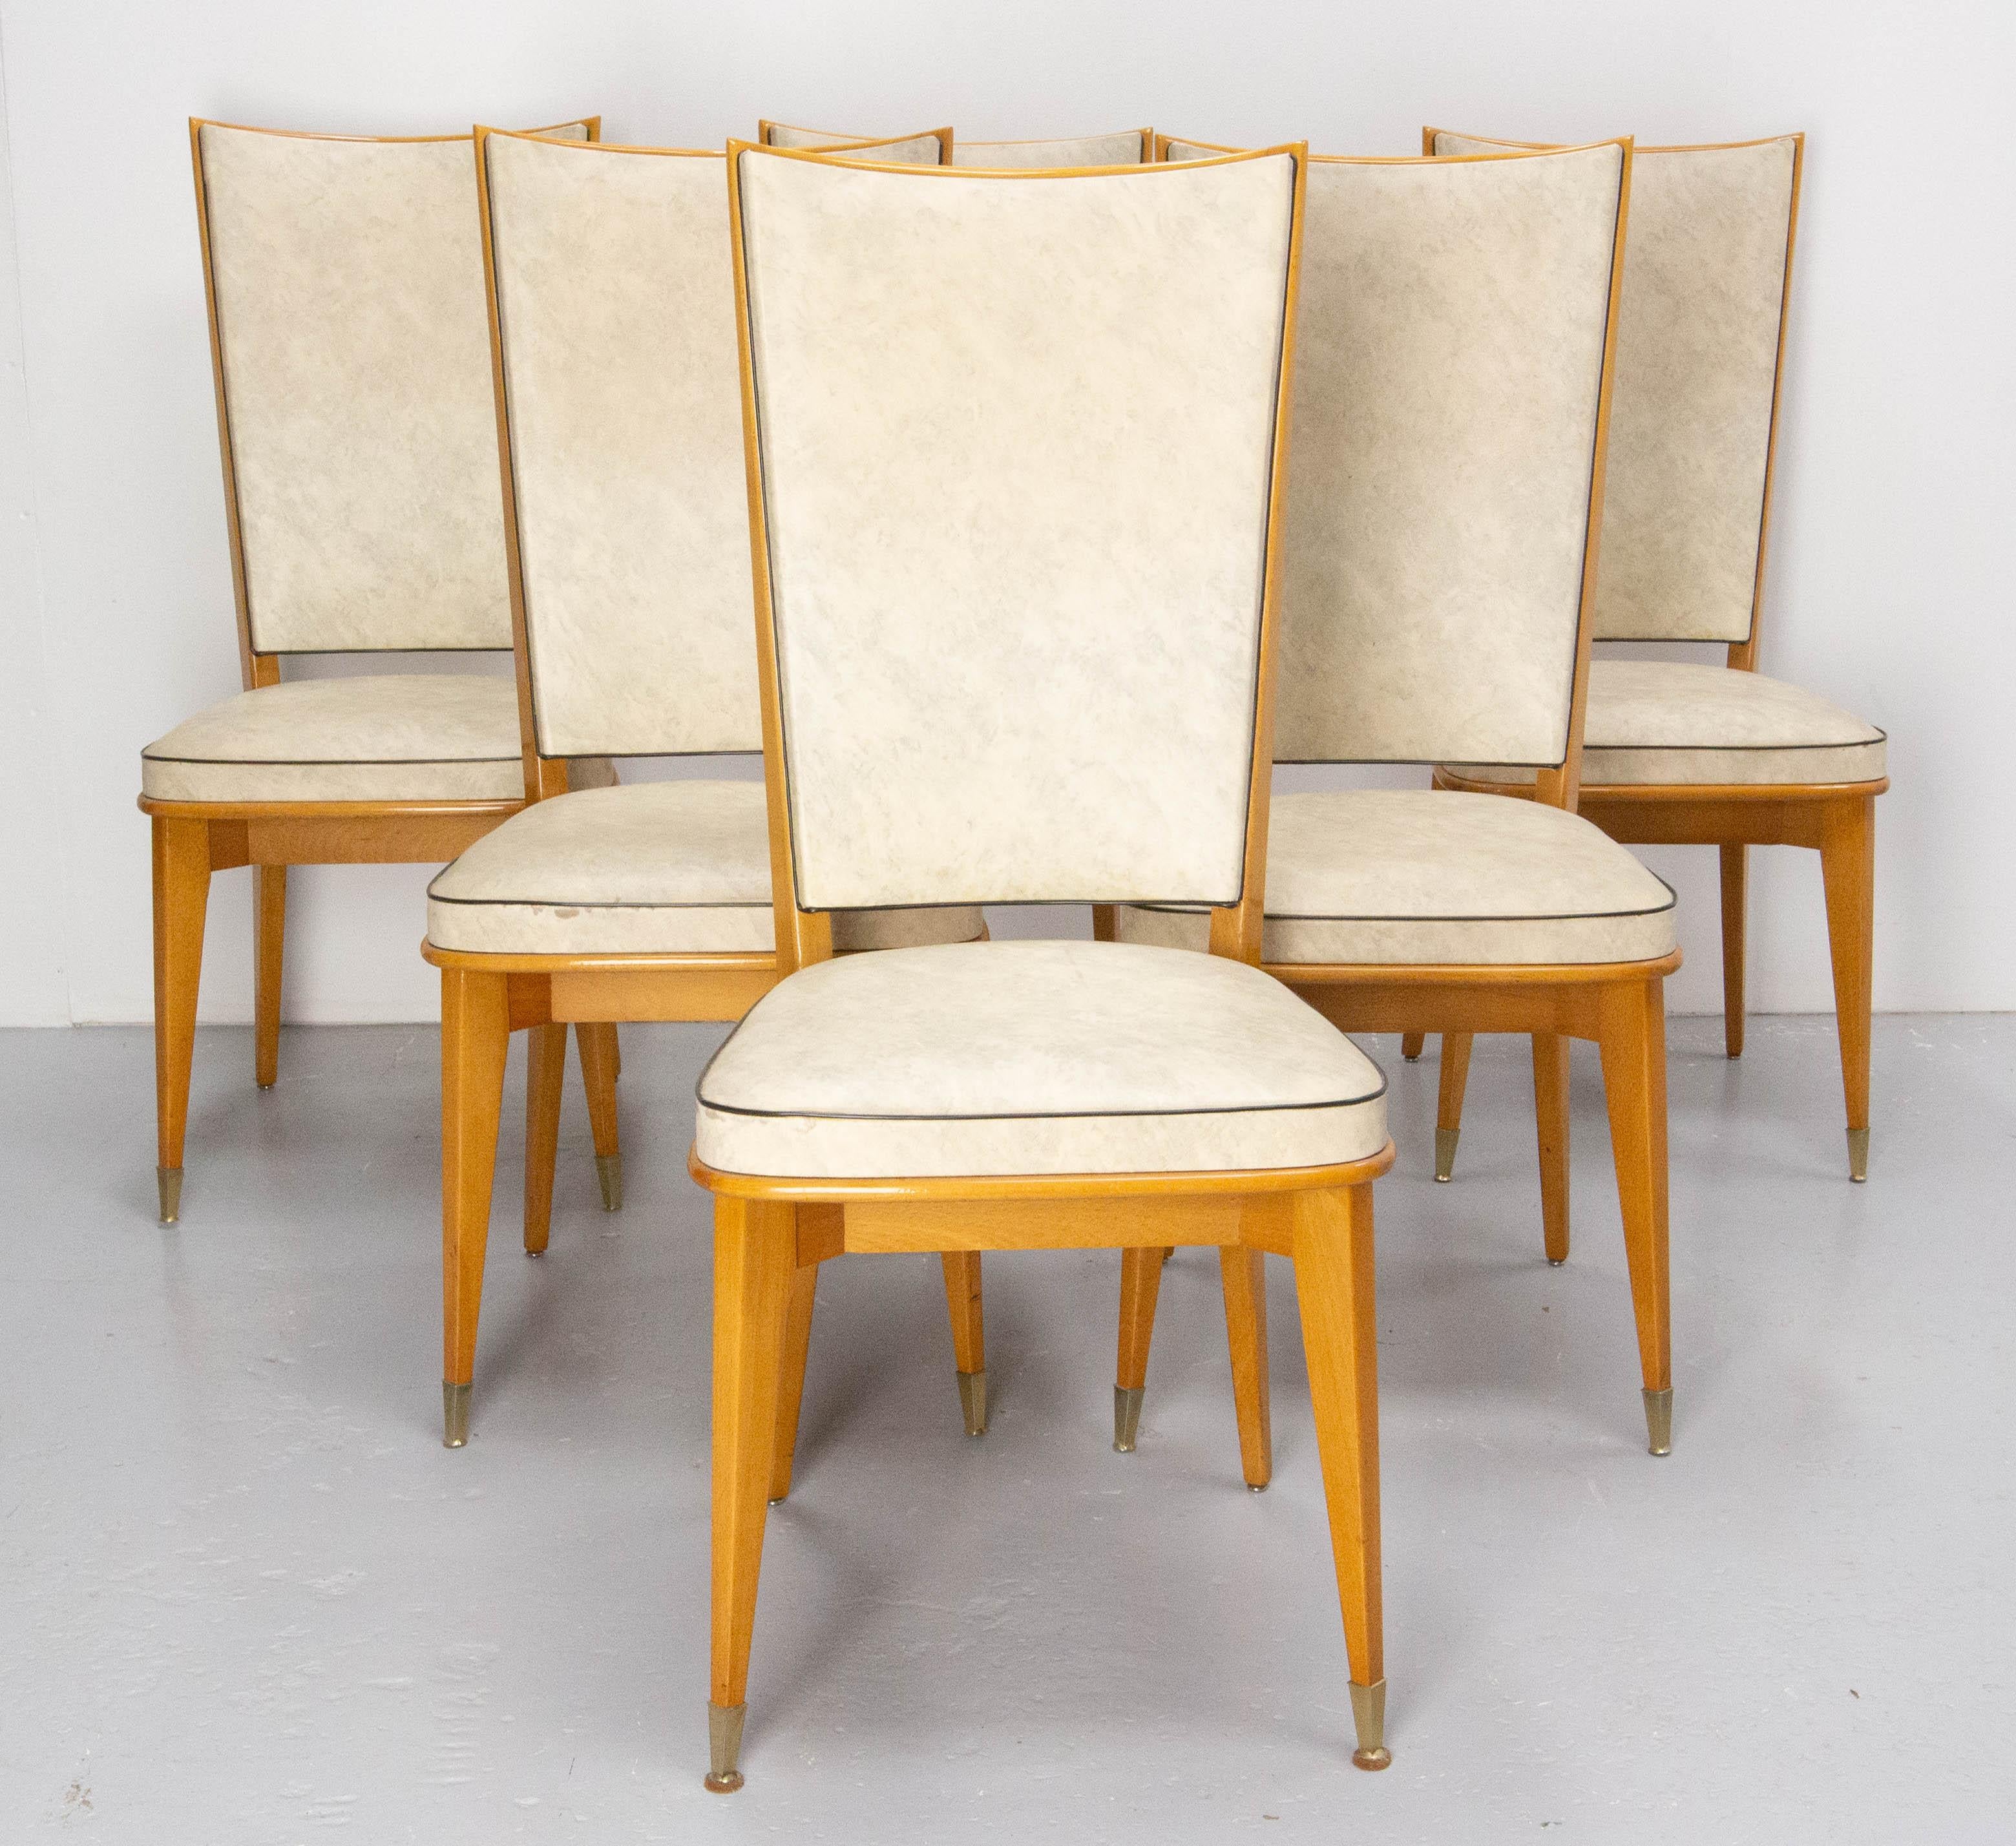 Set of six French dining chairs circa 1950 
Skai and beech. The skai has few stains and can be used has it. You can also recover it if you wish.
The varnish is the original and it is particularly well preserved.
In good condition solid and sound.